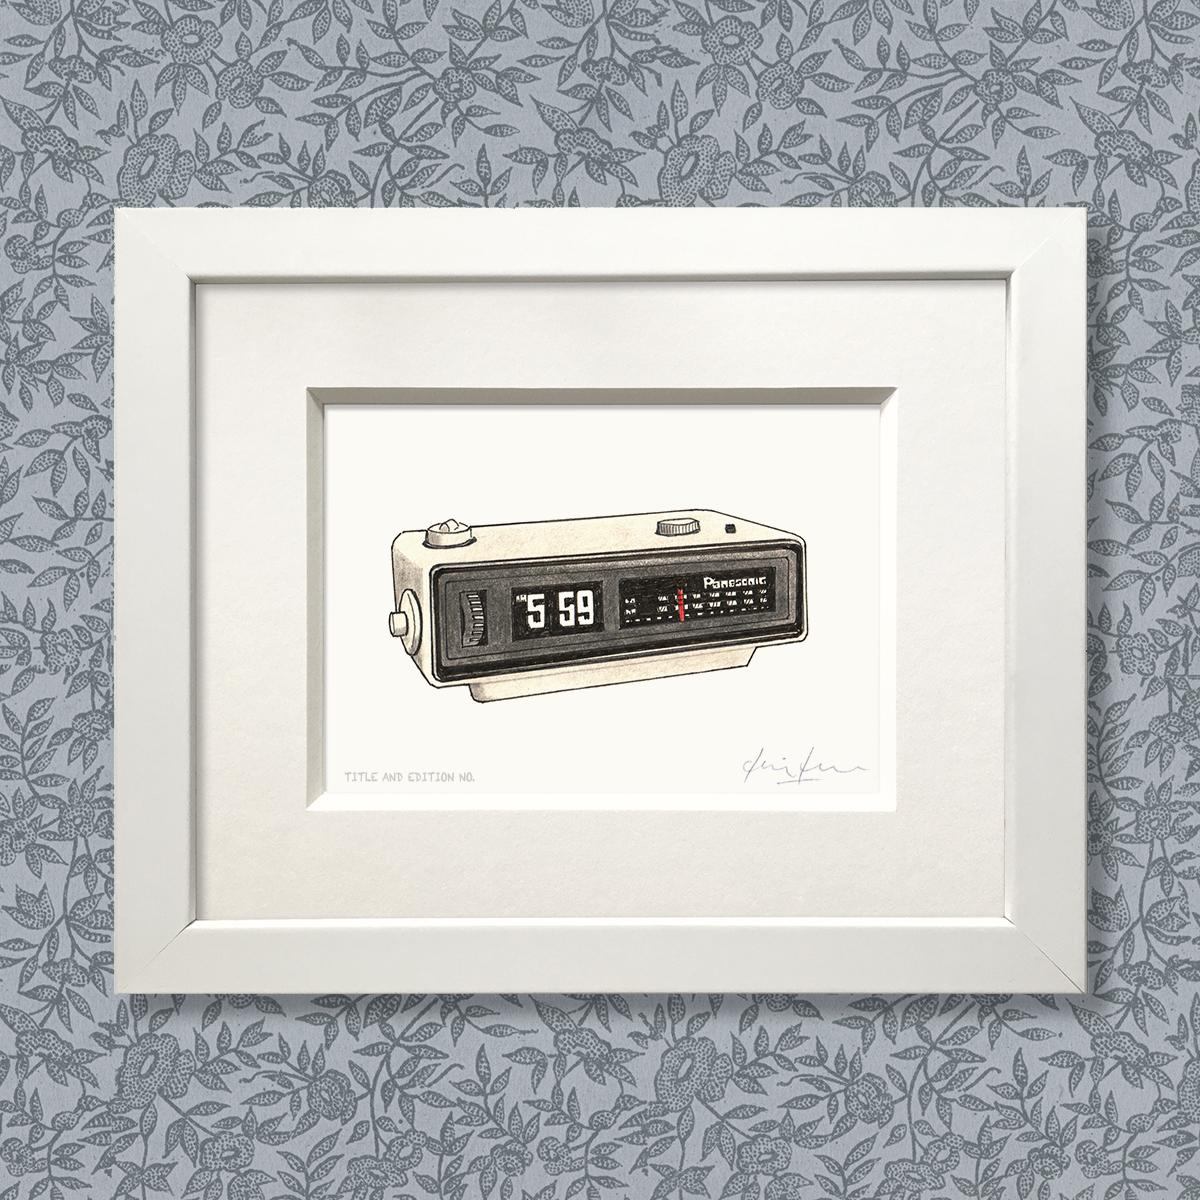 Limited edition print from a pen, ink and coloured pencil drawing of the alarm radio from the film Groundhog Day in a white frame